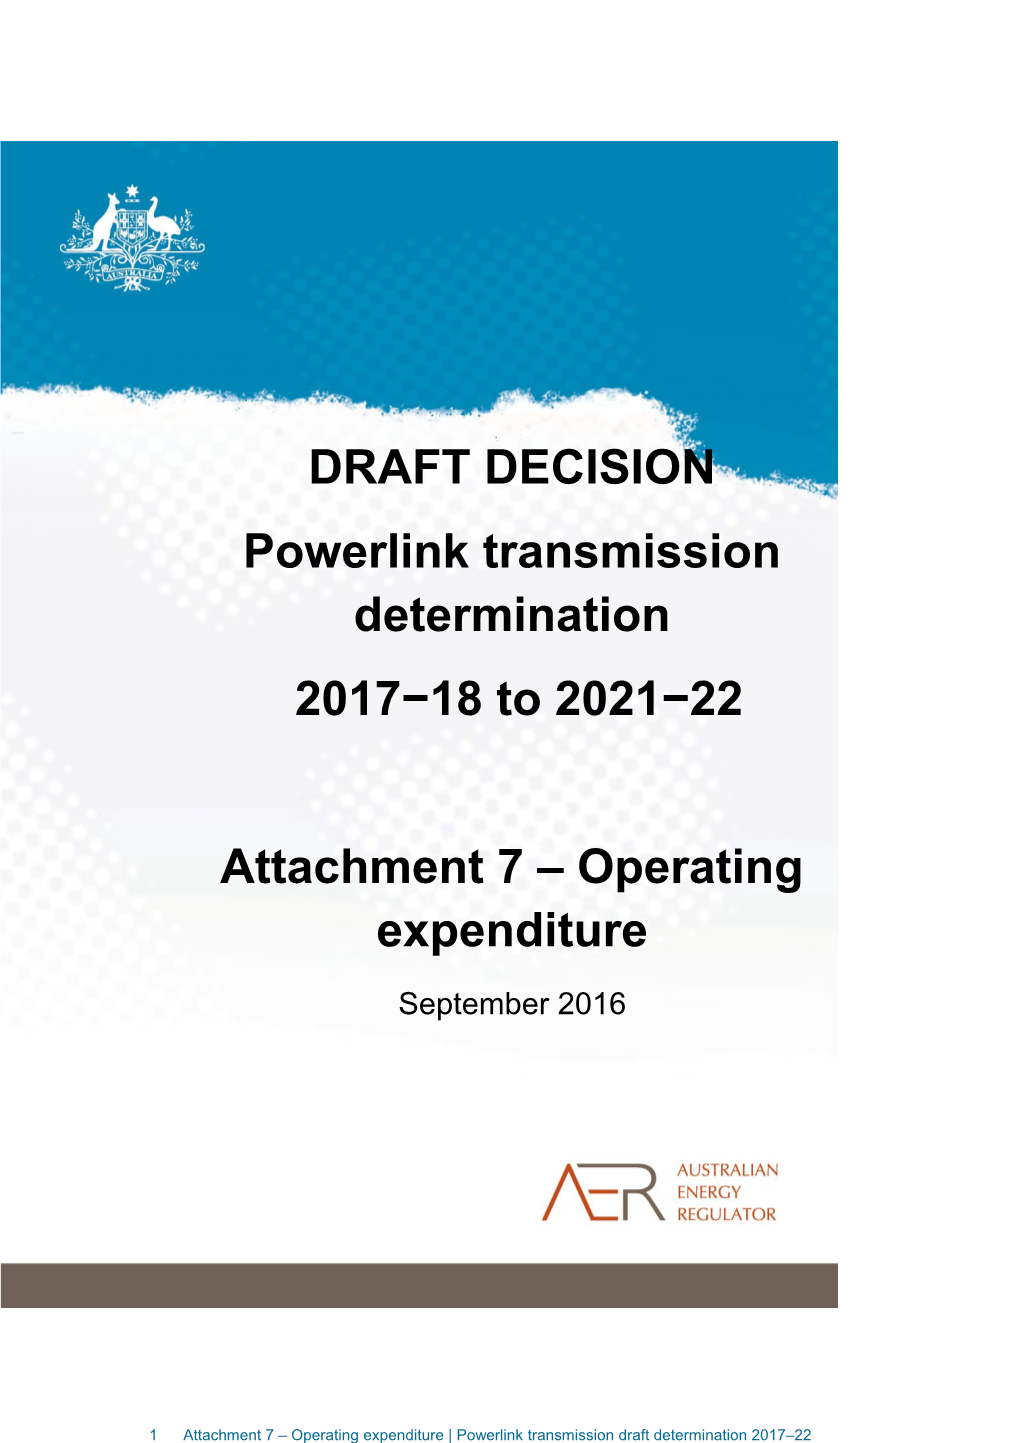 AER Draft Decision - Powerlink - Attachment 7 - Operating Expenditure